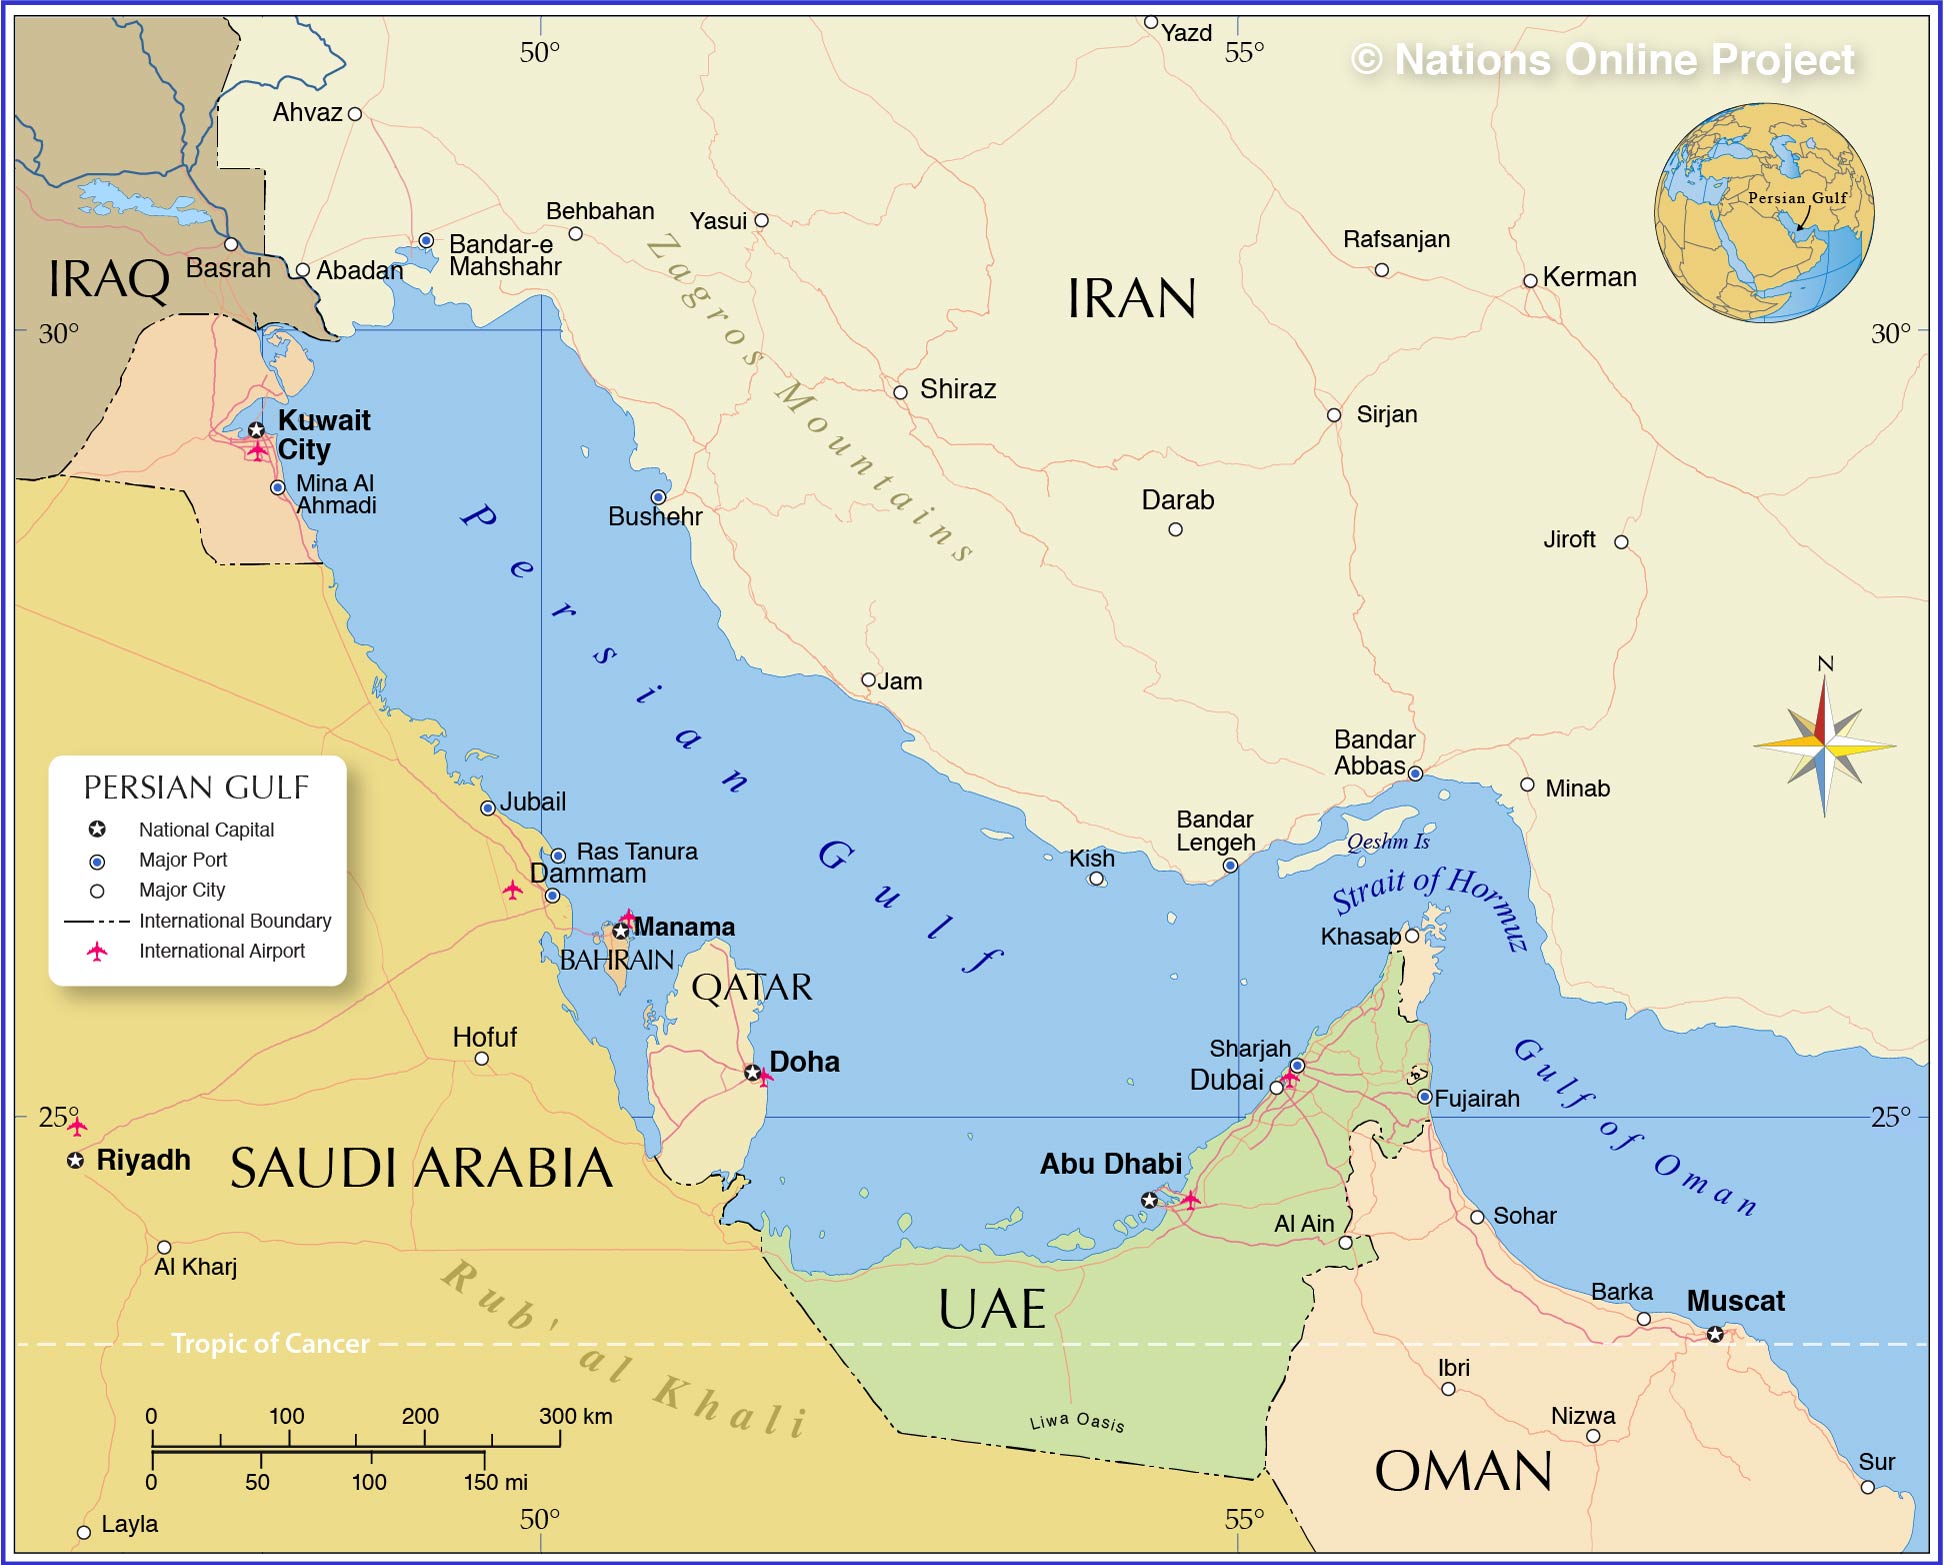 middle east map gulf of oman Political Map Of Persian Gulf Nations Online Project middle east map gulf of oman